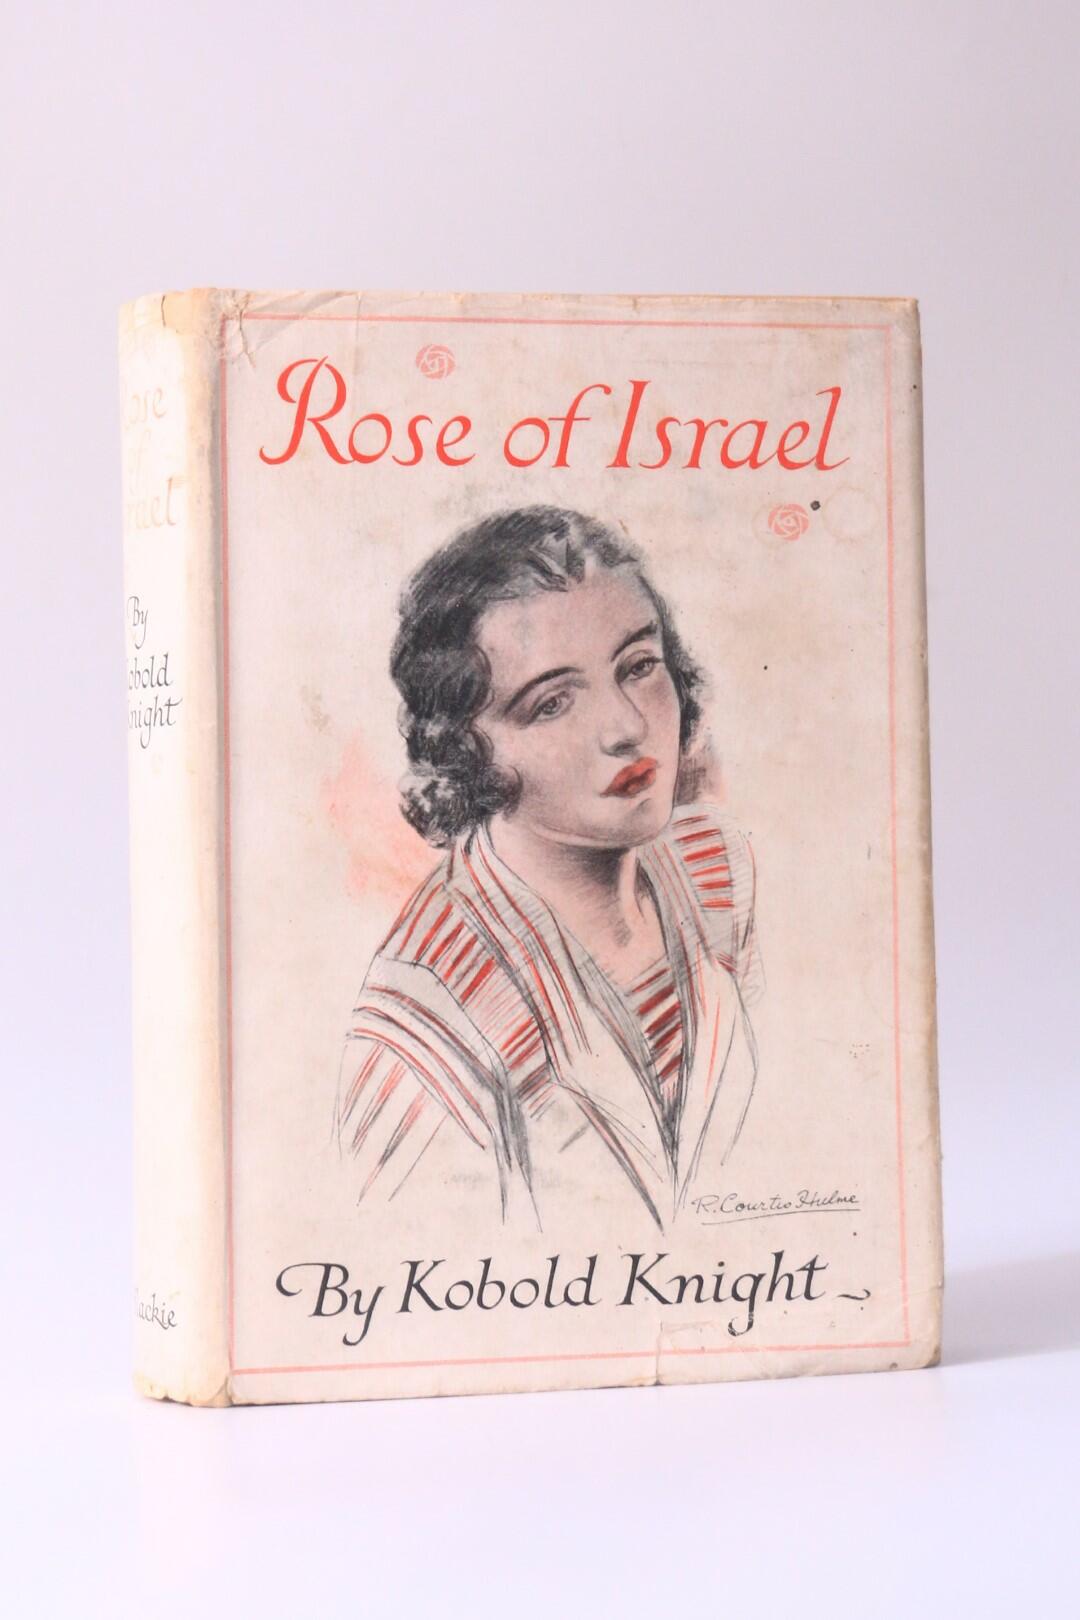 Kobold Knight - Rose of Israel - Blackie, 1936, Signed First Edition.